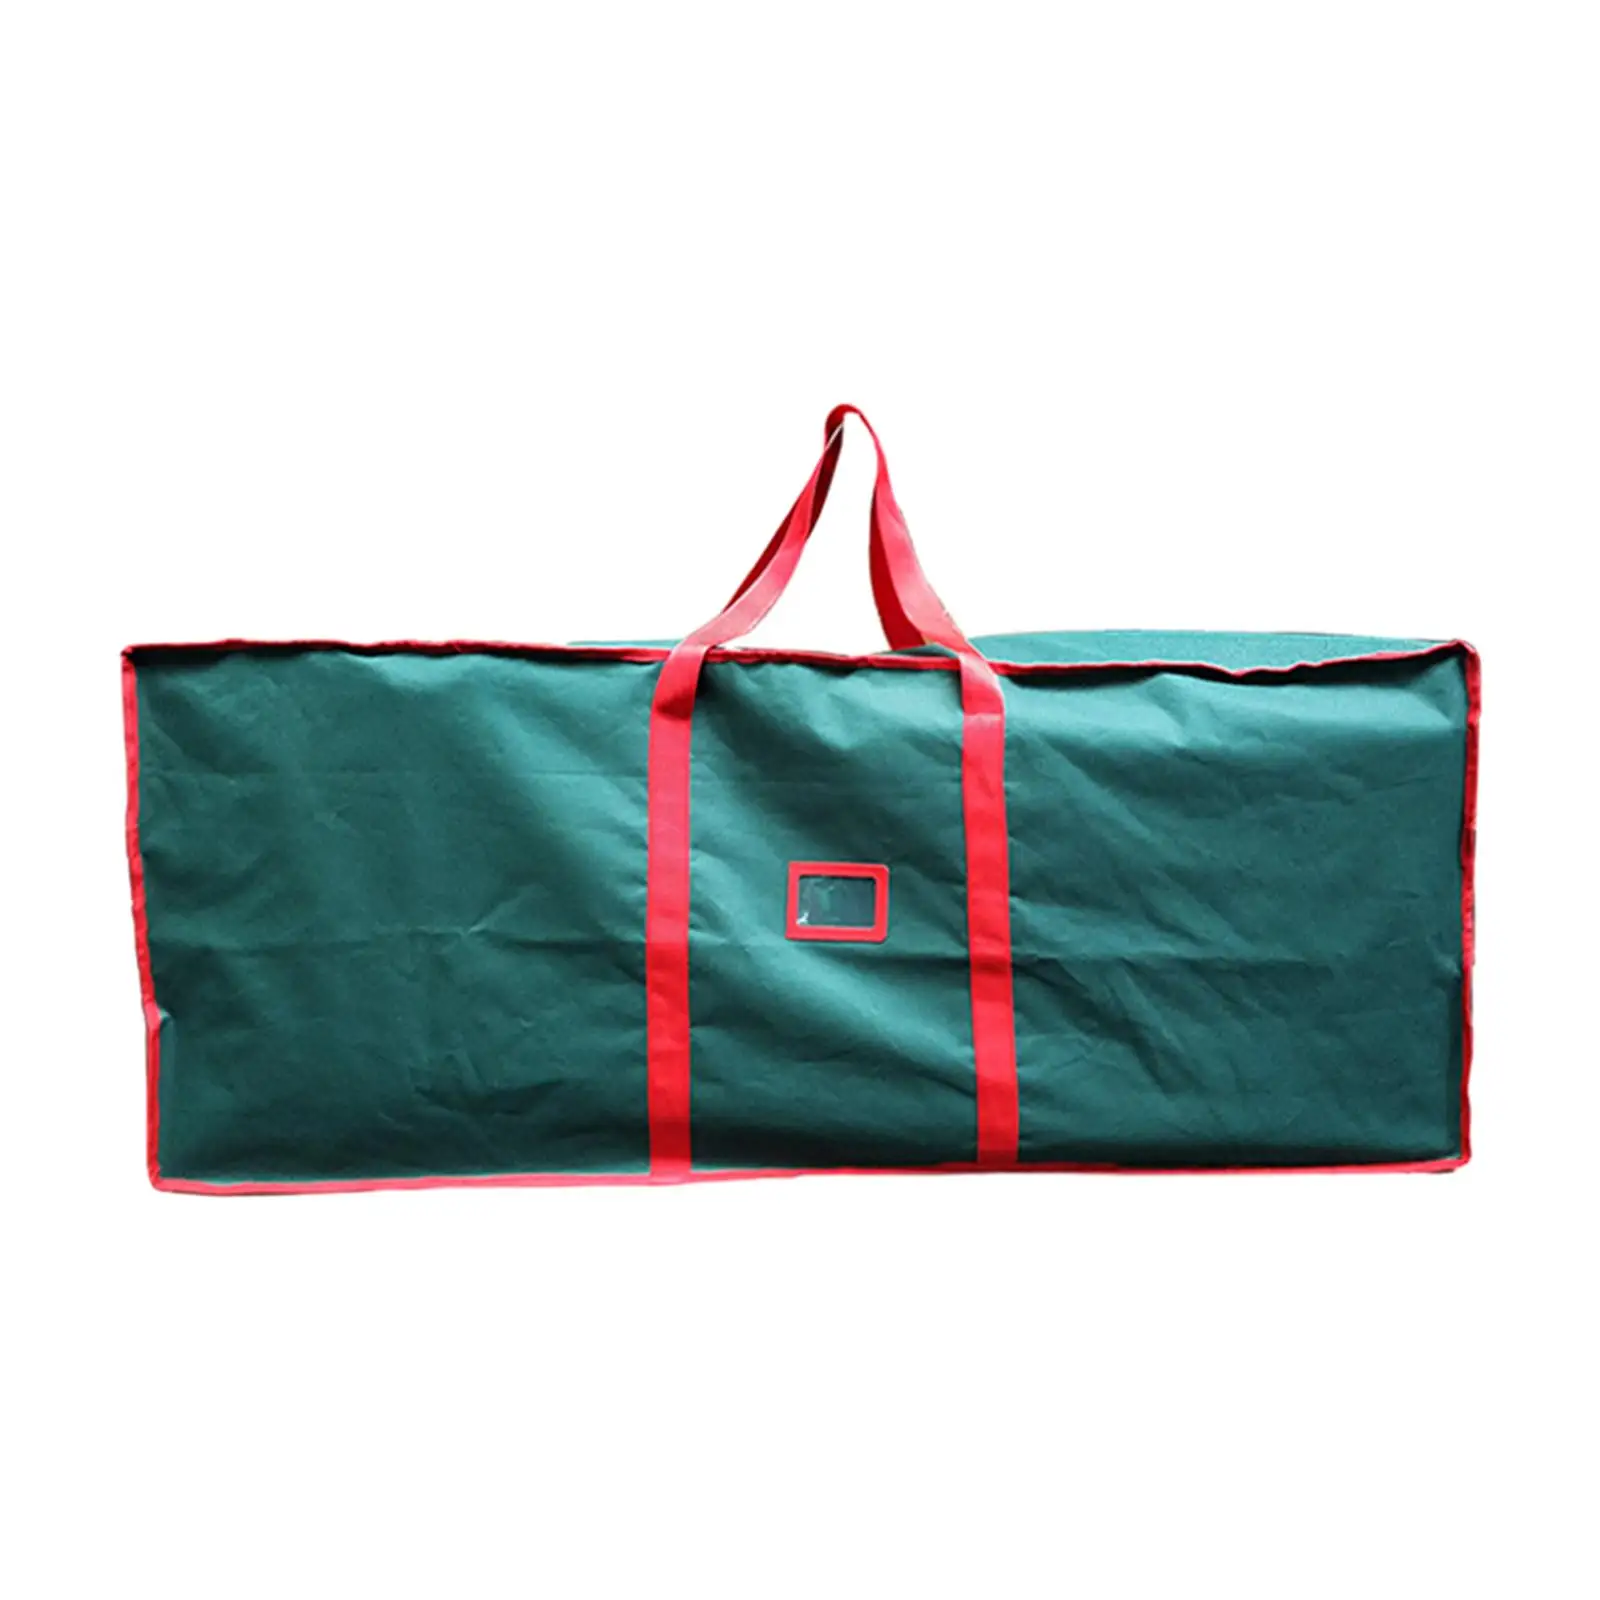 Christmas Tree Storage Bag Pouch Carry Handles Christmas Tree Storage Box